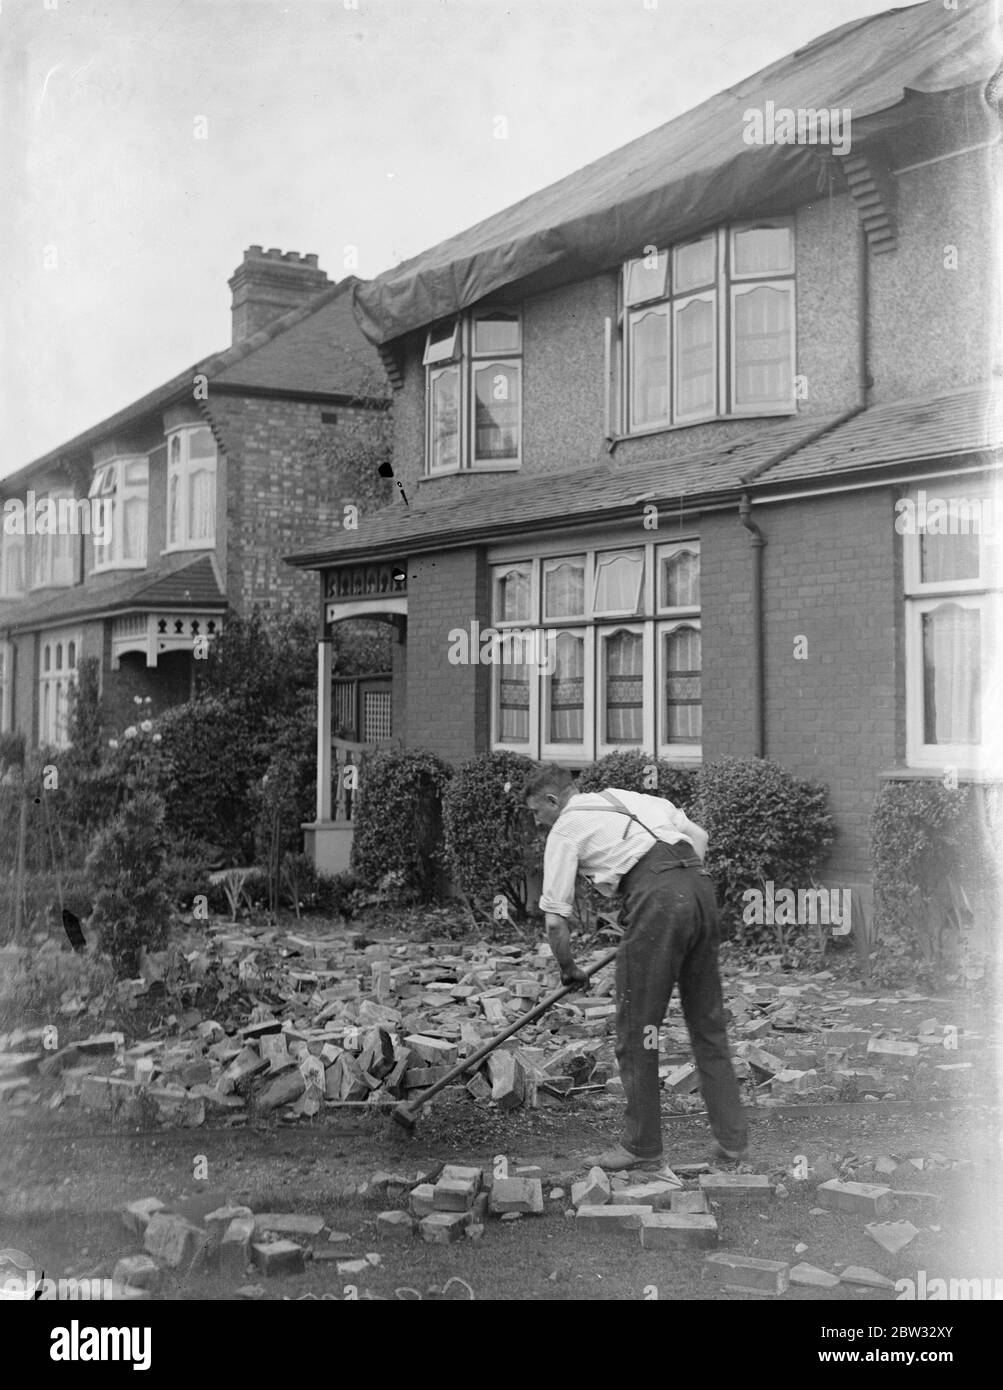 Houses damaged in great storm at Enfield . Two semi detached houses were struck and badly damaged by a thunderbolt during the great storm which broke over London . The greater part of the roof was torn away and pieces of furniture were scattered about and thrown on to the floor . Fireplaces were blown and water pipes burst . Mr Franck Higham with his wife and child were at tea when the thunderbolt came down the chimney , and had a narrow escape . Mr Frank Higham clearing away the debris from his garden after the havoc wrought by the storm . 23 July 1932 Stock Photo